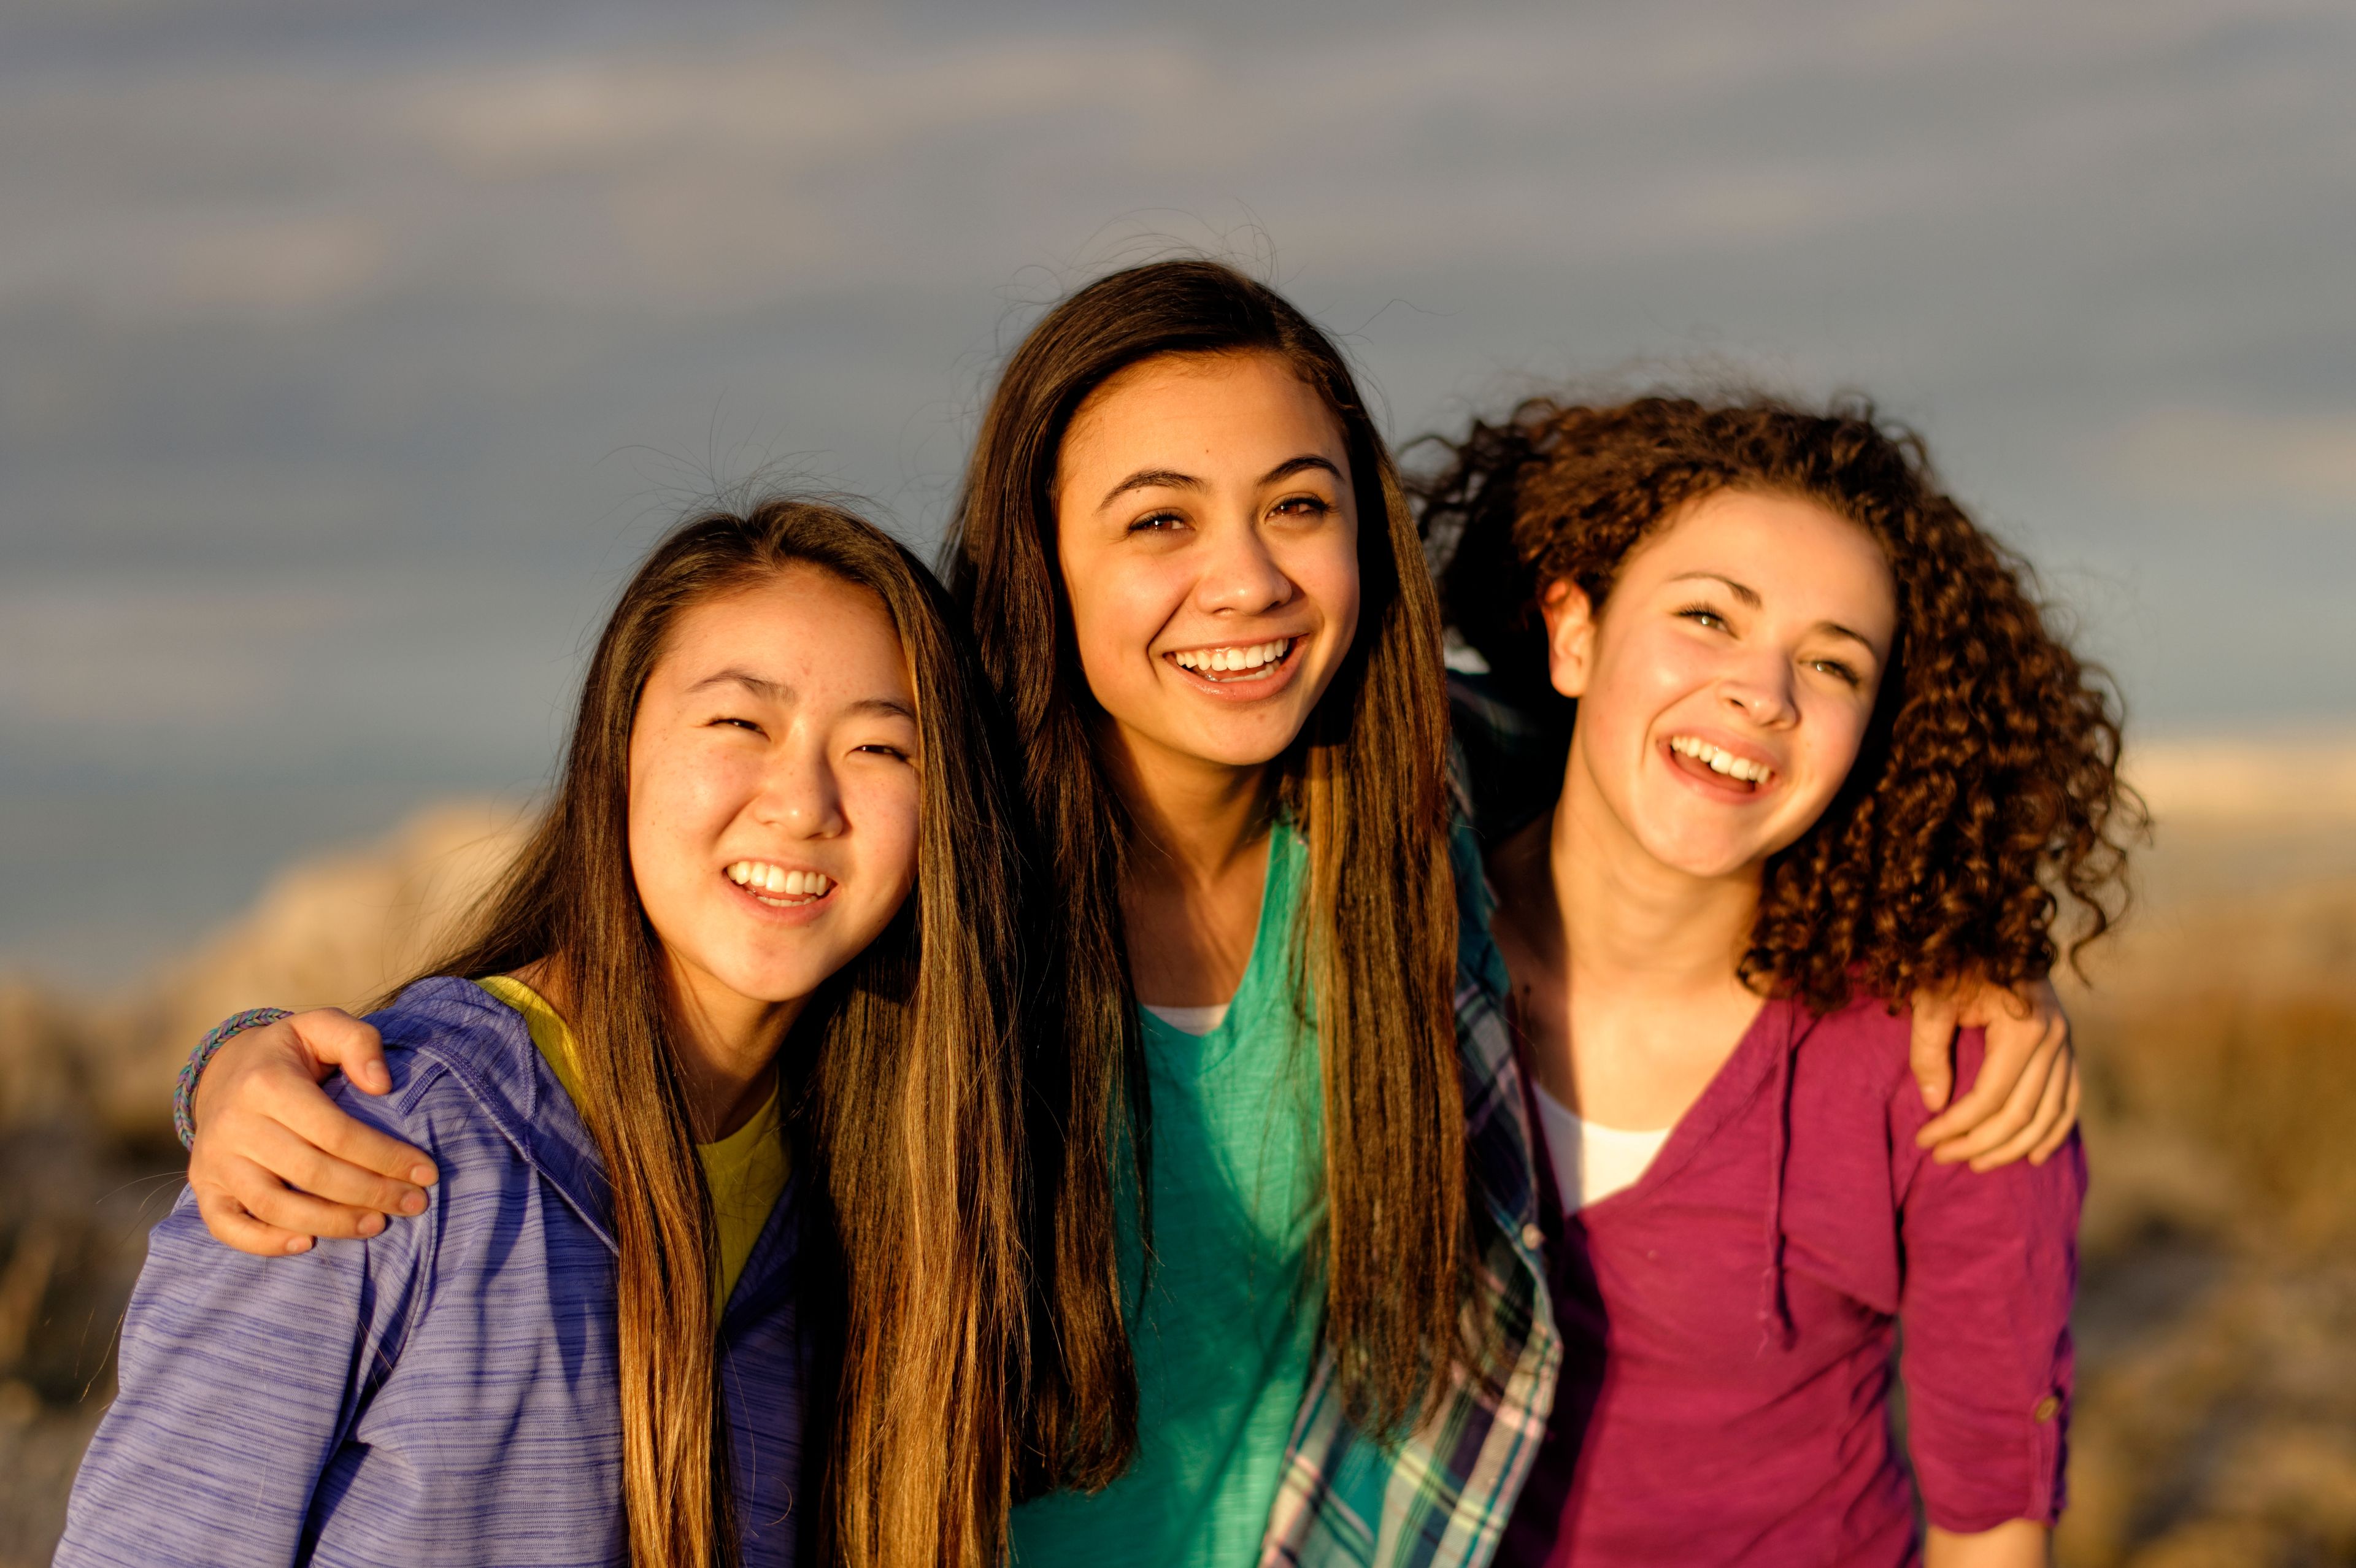 Three young women stand together and smile while enjoying a hike or nature walk.